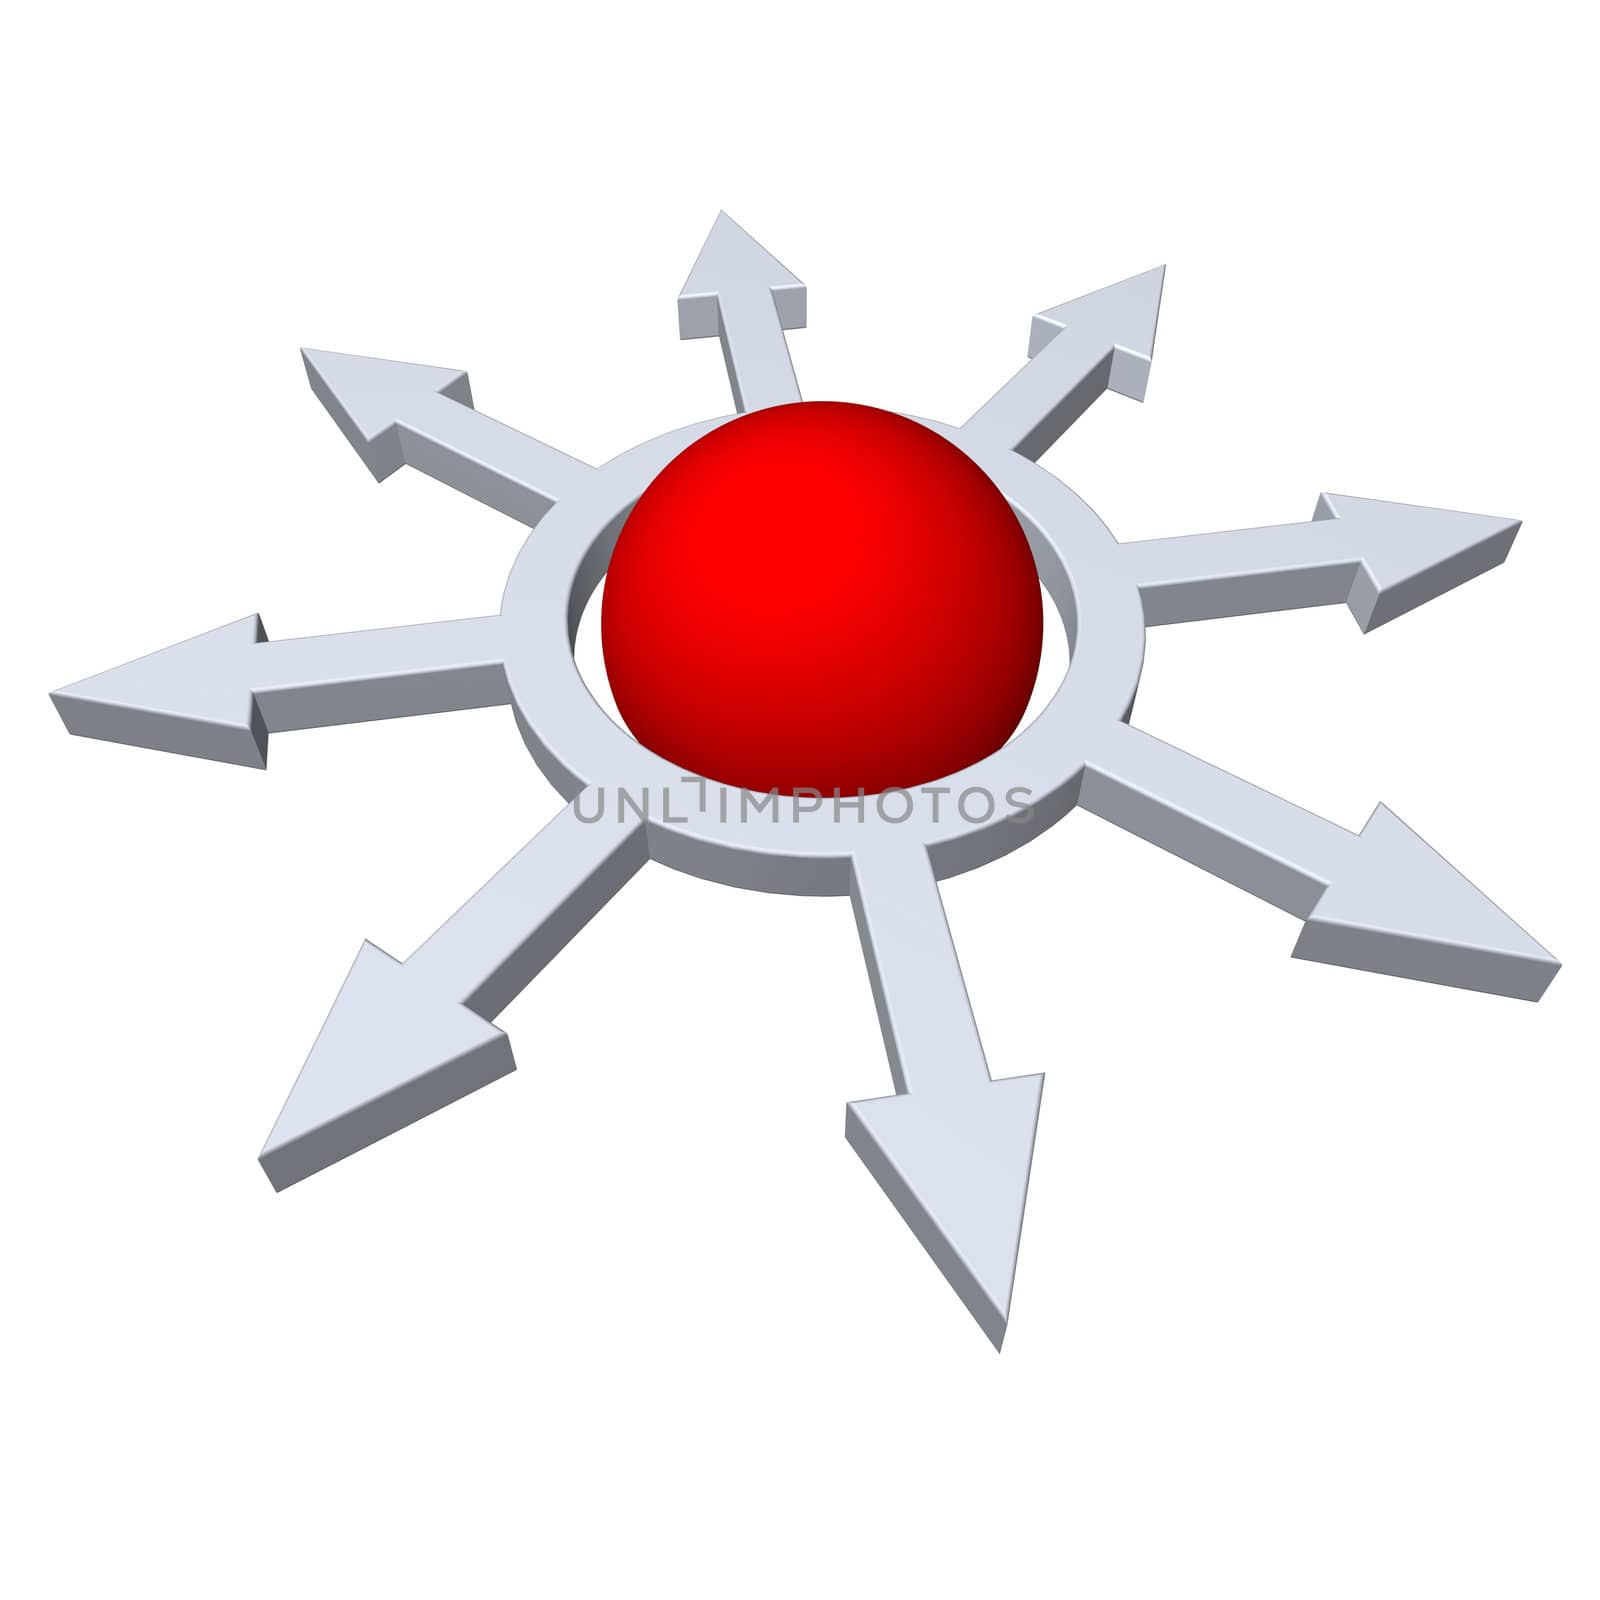 ring with pointers to all directions and red ball in the center - 3d illustration